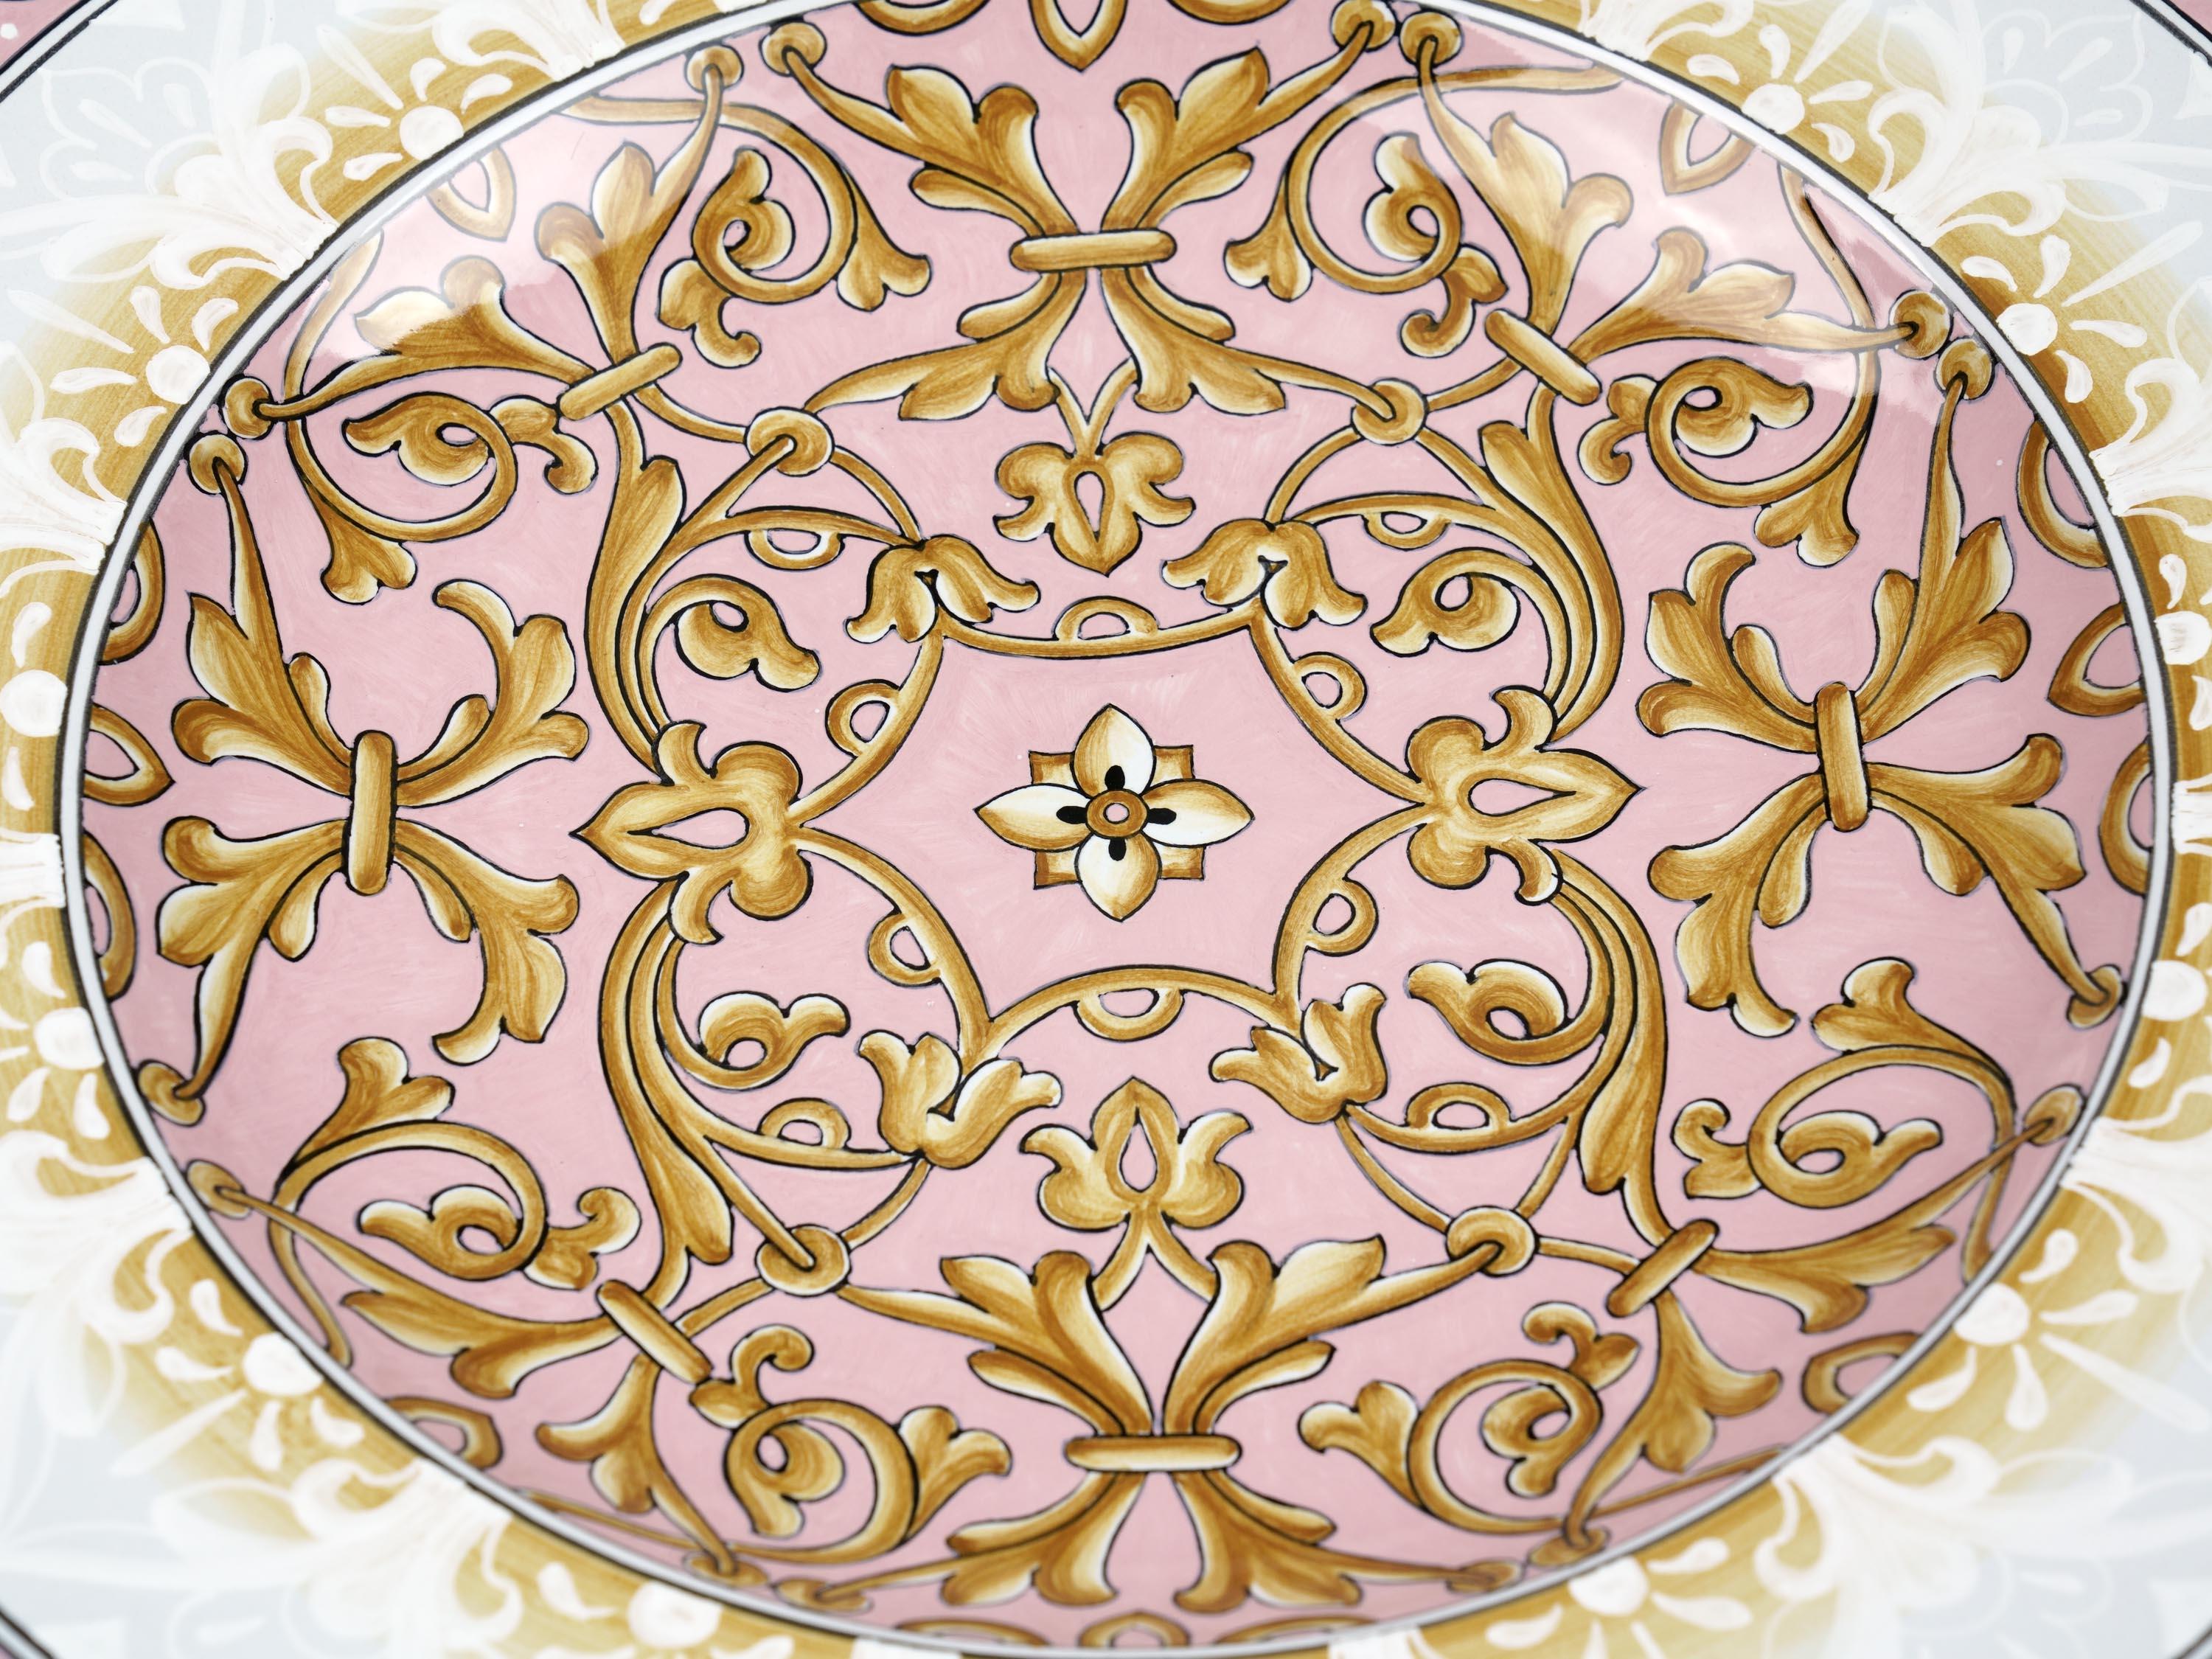 Large Ceramic Plate, Decorative Majolica Bowl Centerpiece, Pink White, In Stock For Sale 4